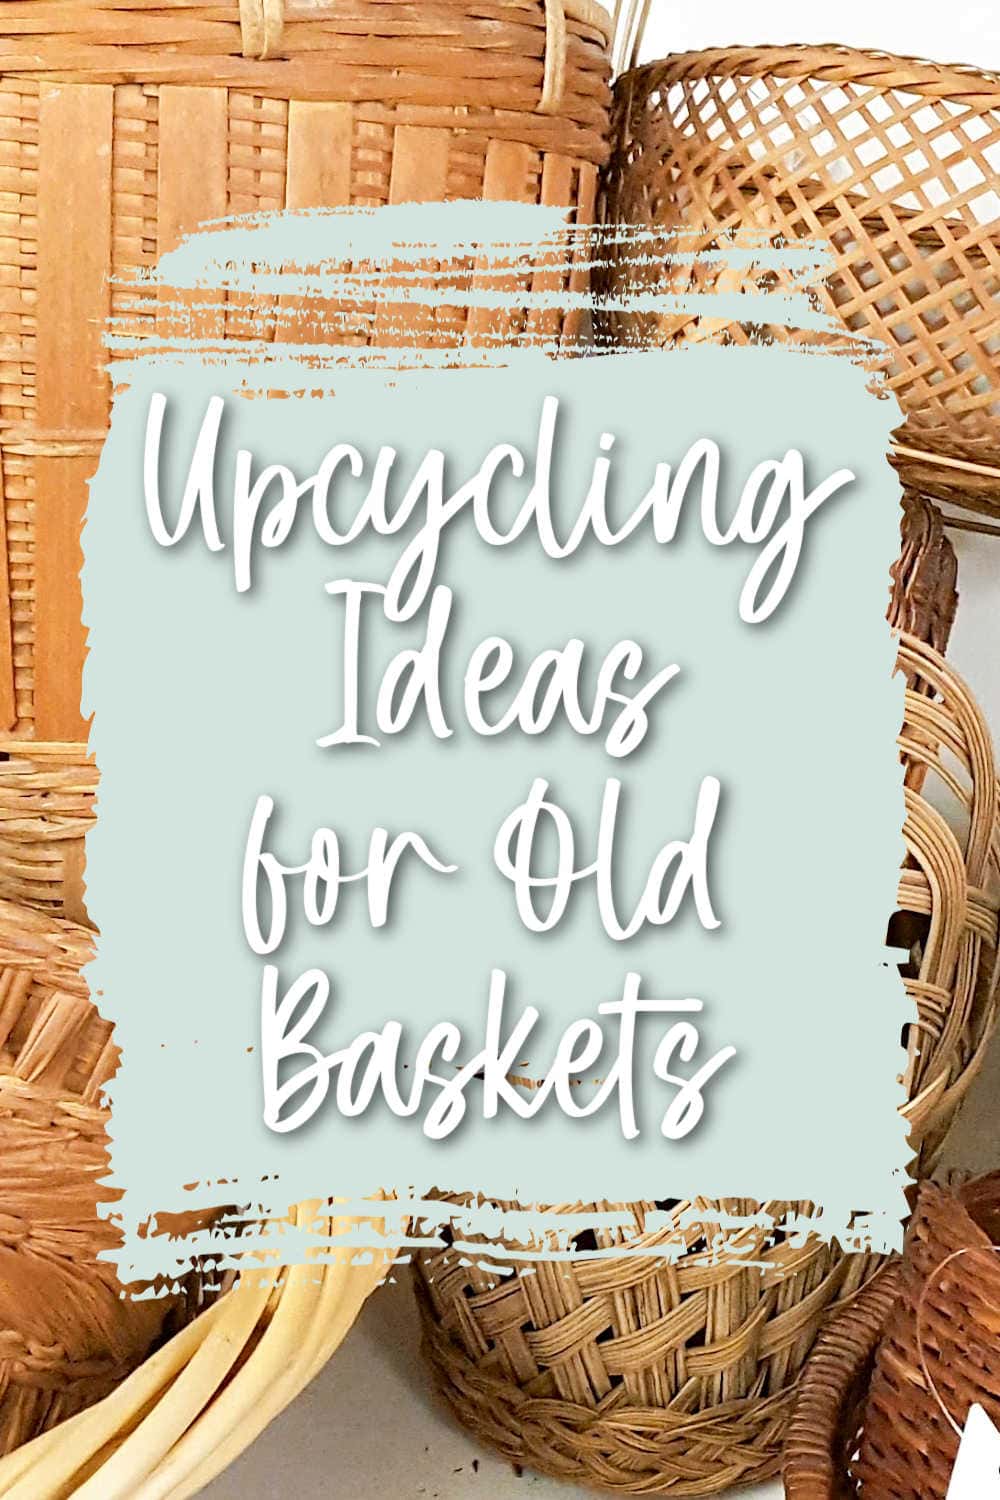 thrift store crafts with wicker baskets